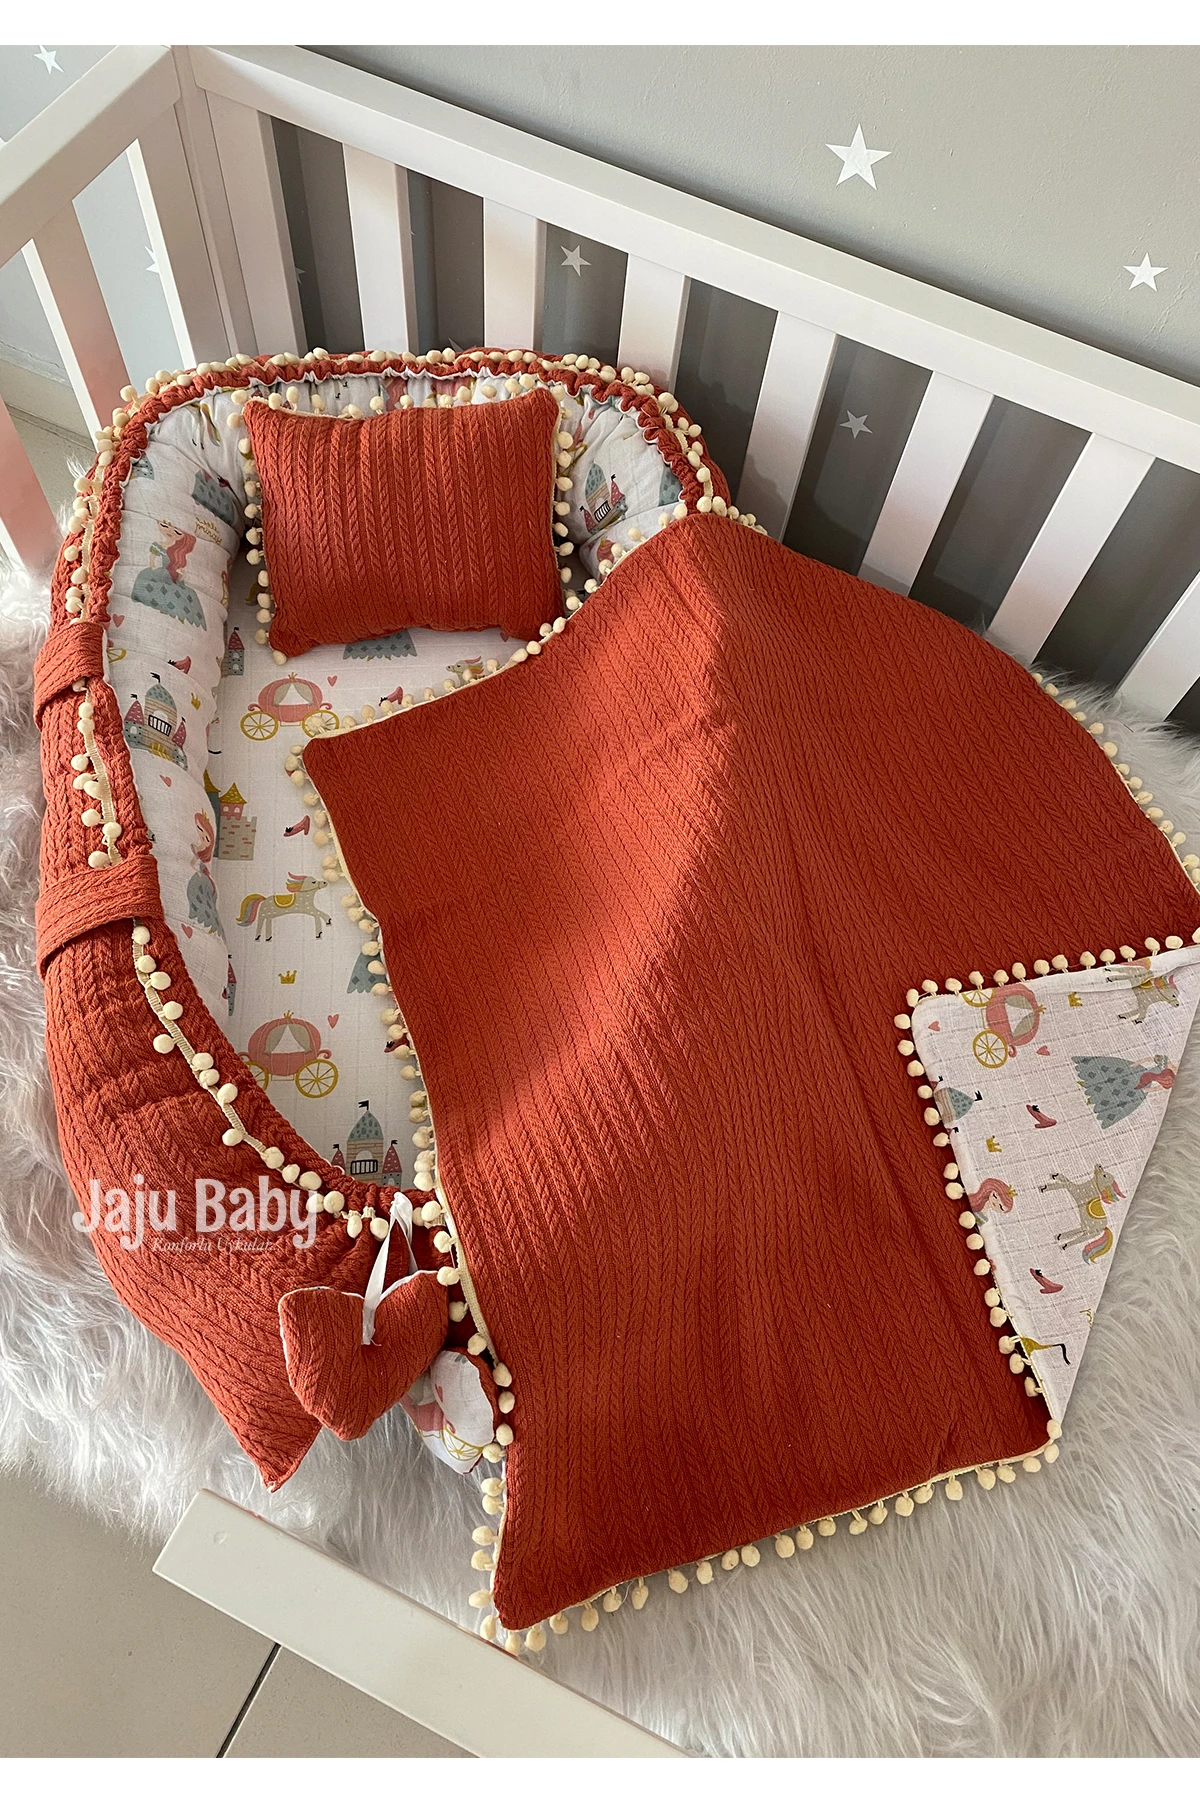 Jaju Baby Special Handmade Tile Knit Pique Fabric and Muslin Fabric Pompon 3-Piece Babynest Set Mother Side Portable Baby Bed